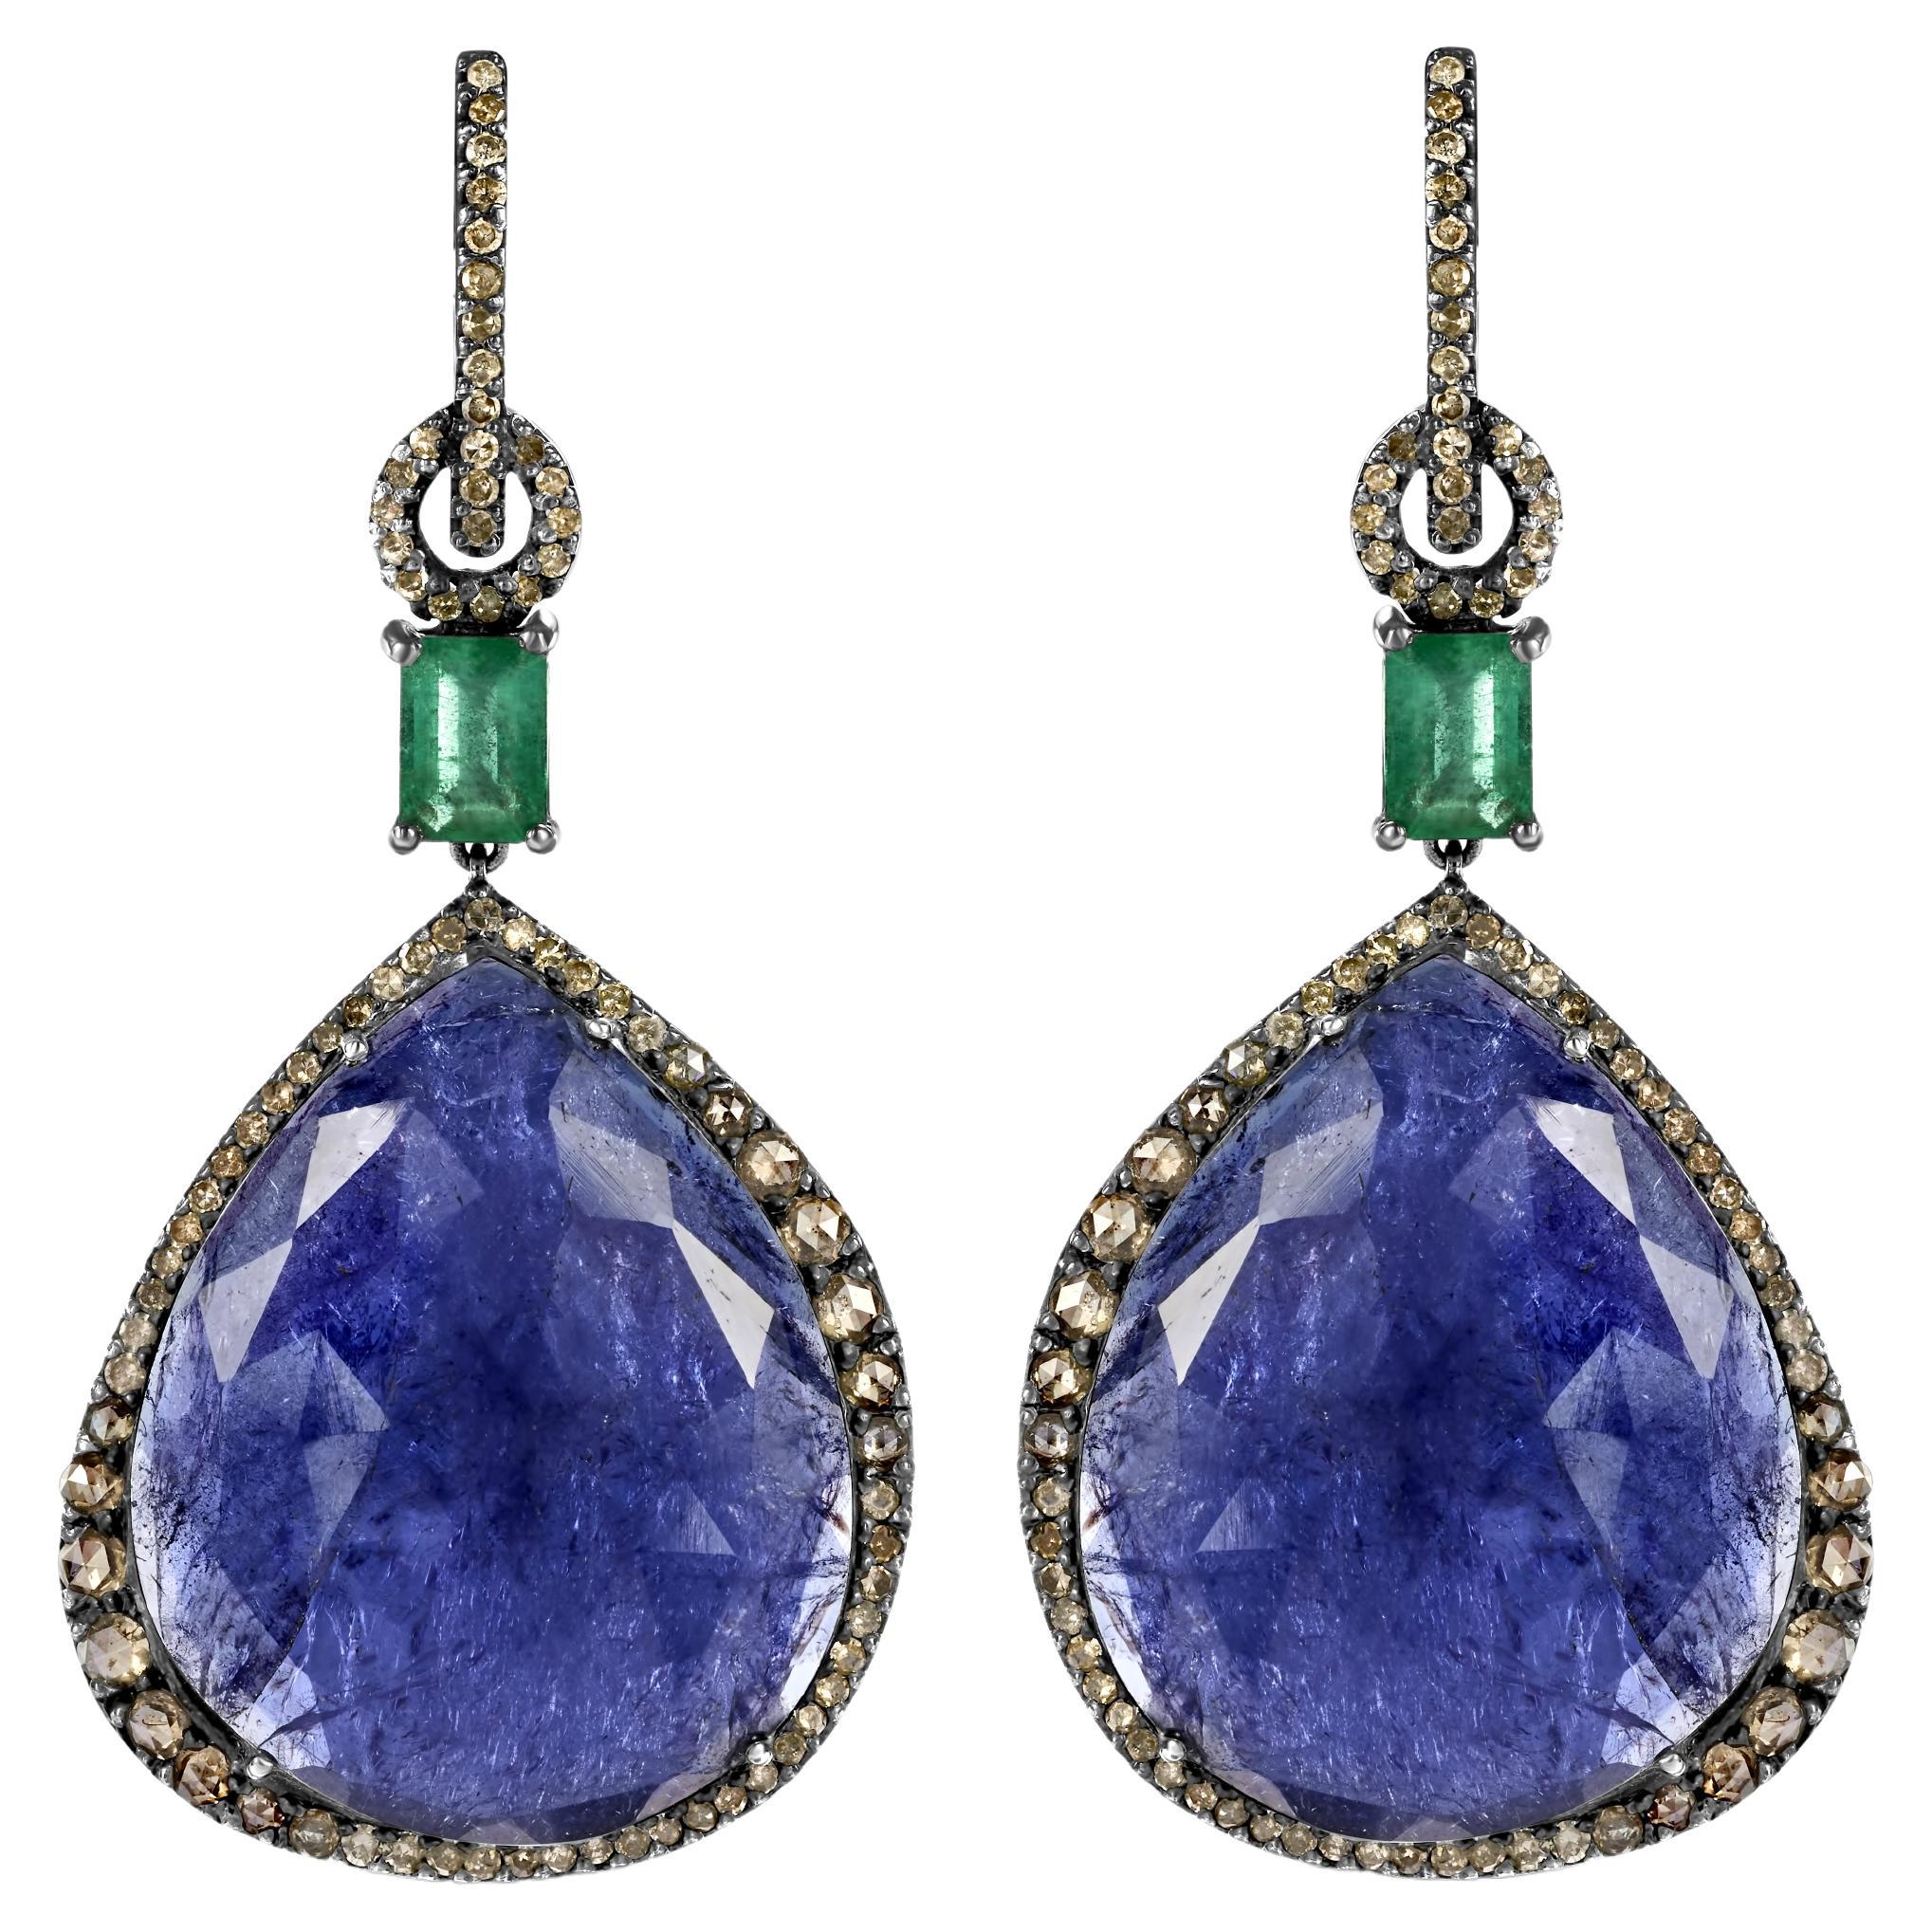 Earrings in Silver & Gold Set with Diamond, Emerald, 8.45 Carat Tanzanite For Sale